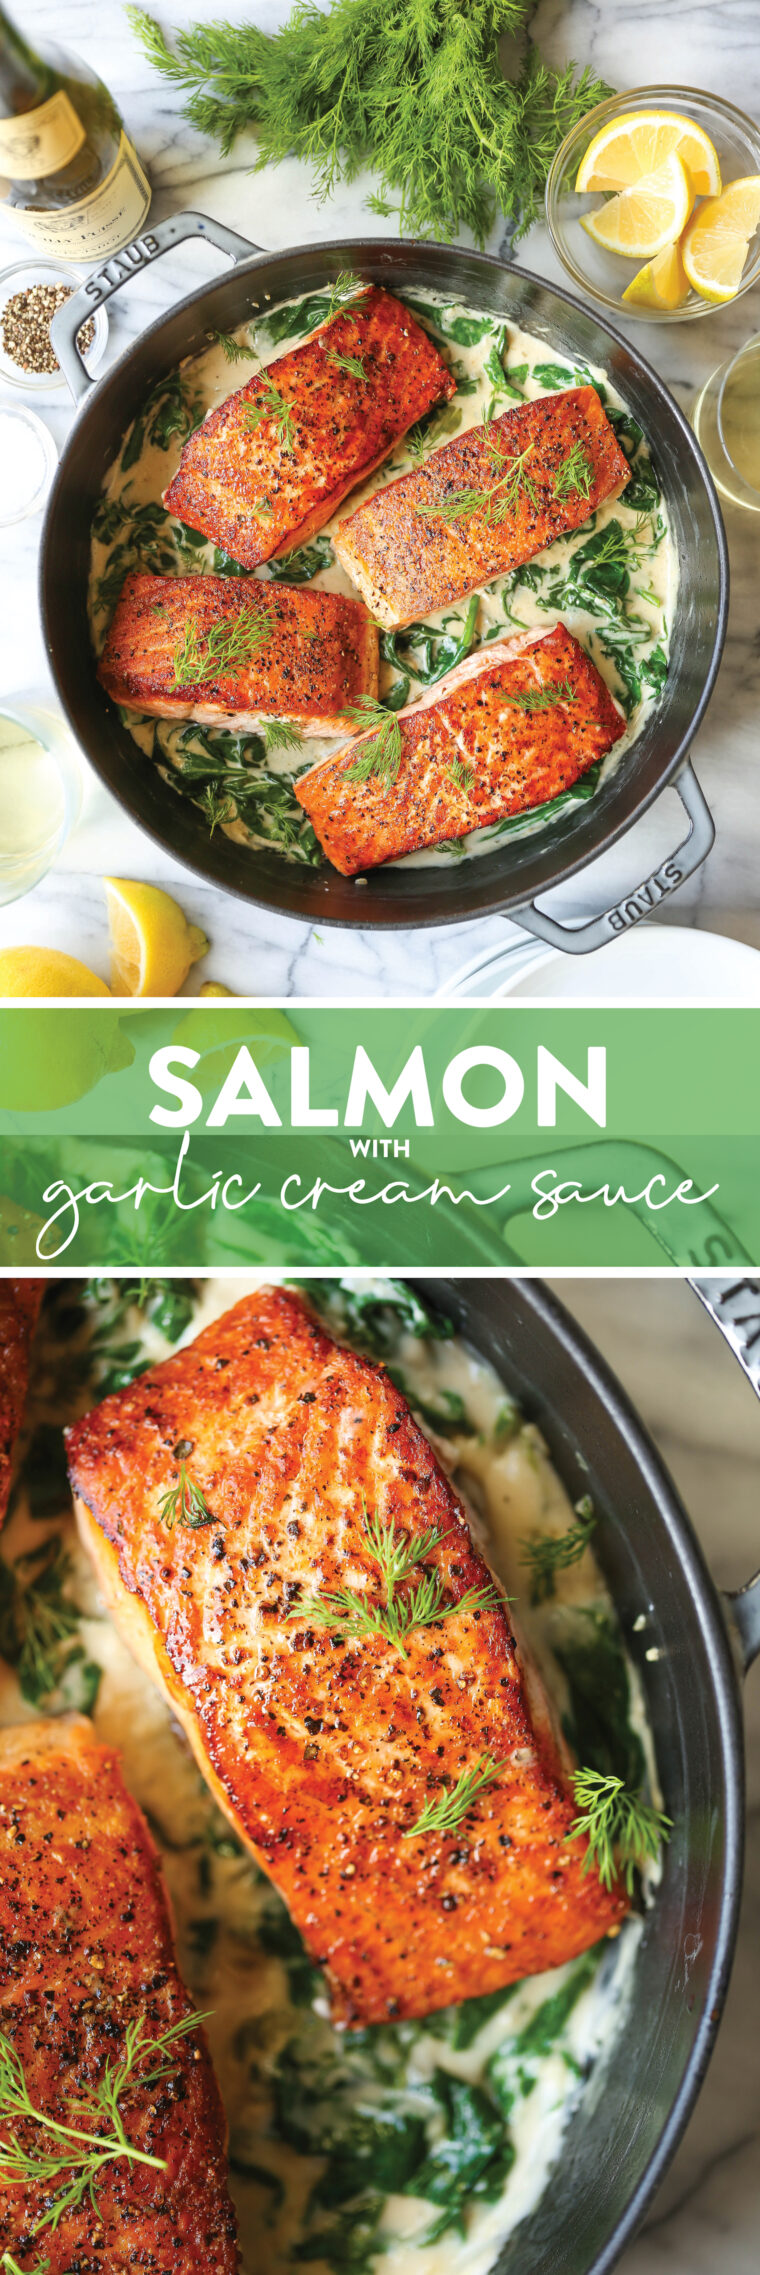 Salmon with Garlic Cream Sauce - Perfectly pan-seared salmon served with the most irresistible garlicky cream sauce with sneaked in spinach!